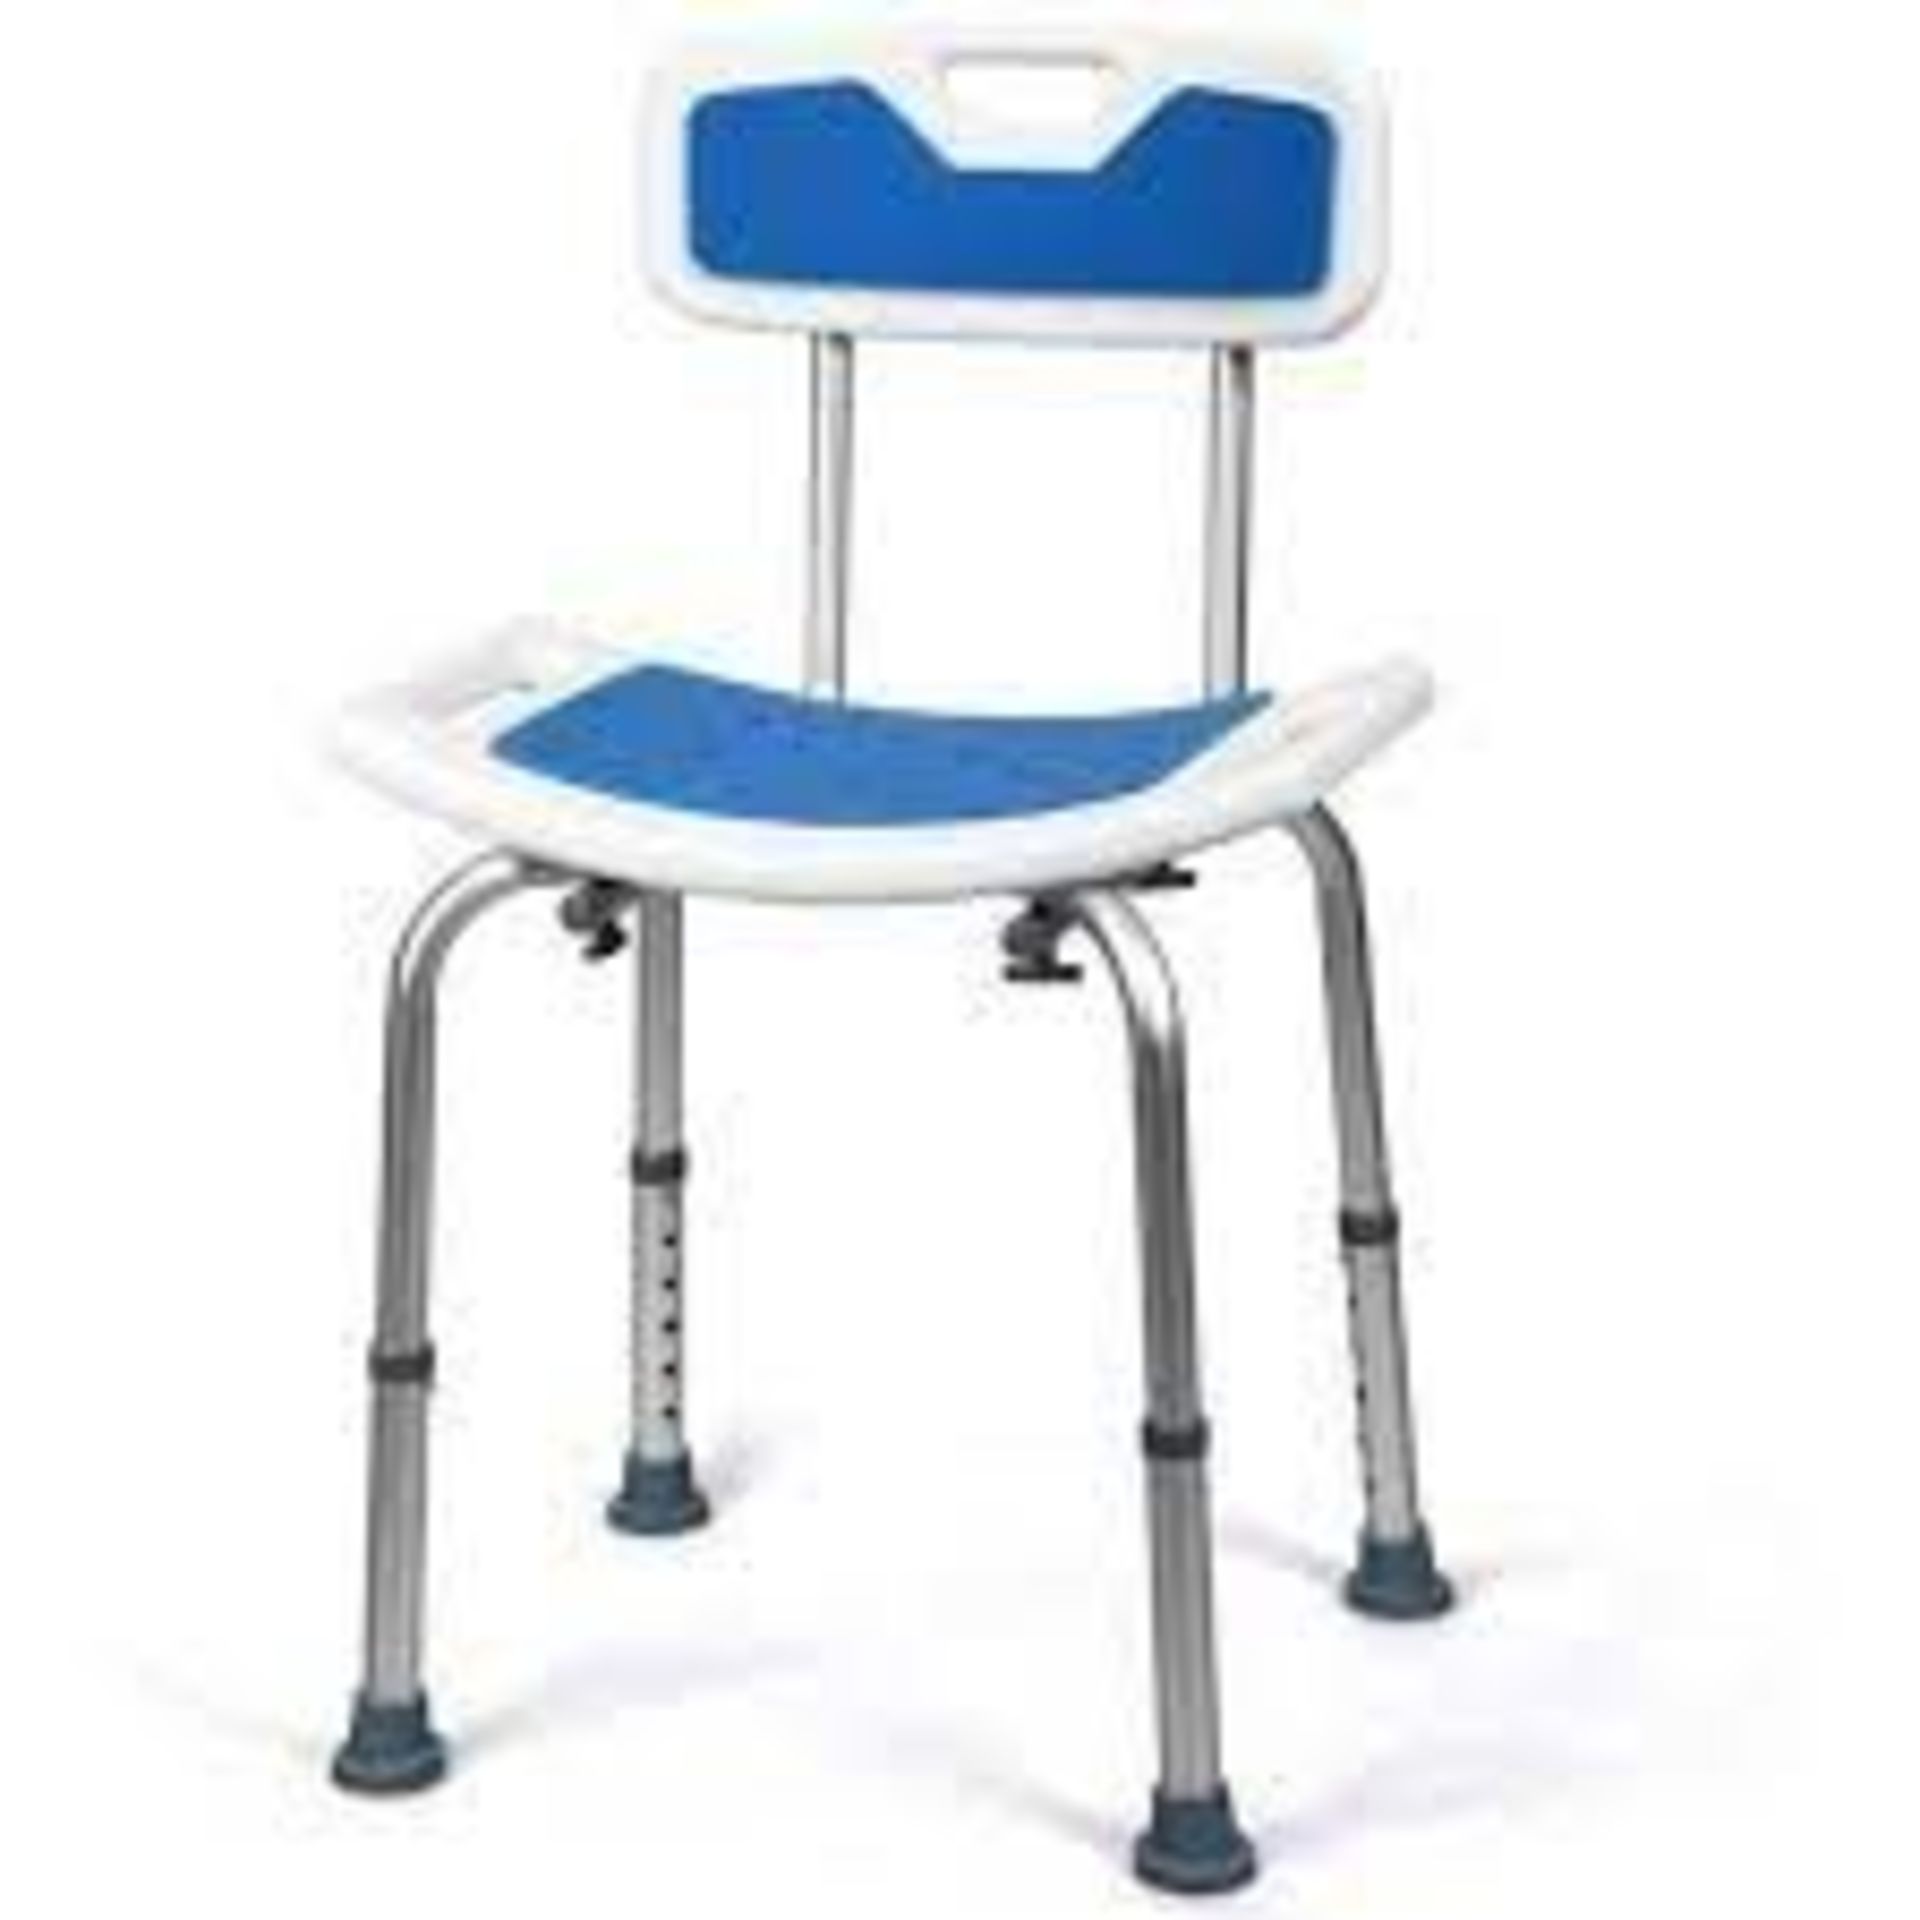 Height Adjustable Shower Chair. - R14.6. Make your daily routine more comfortable and much safer